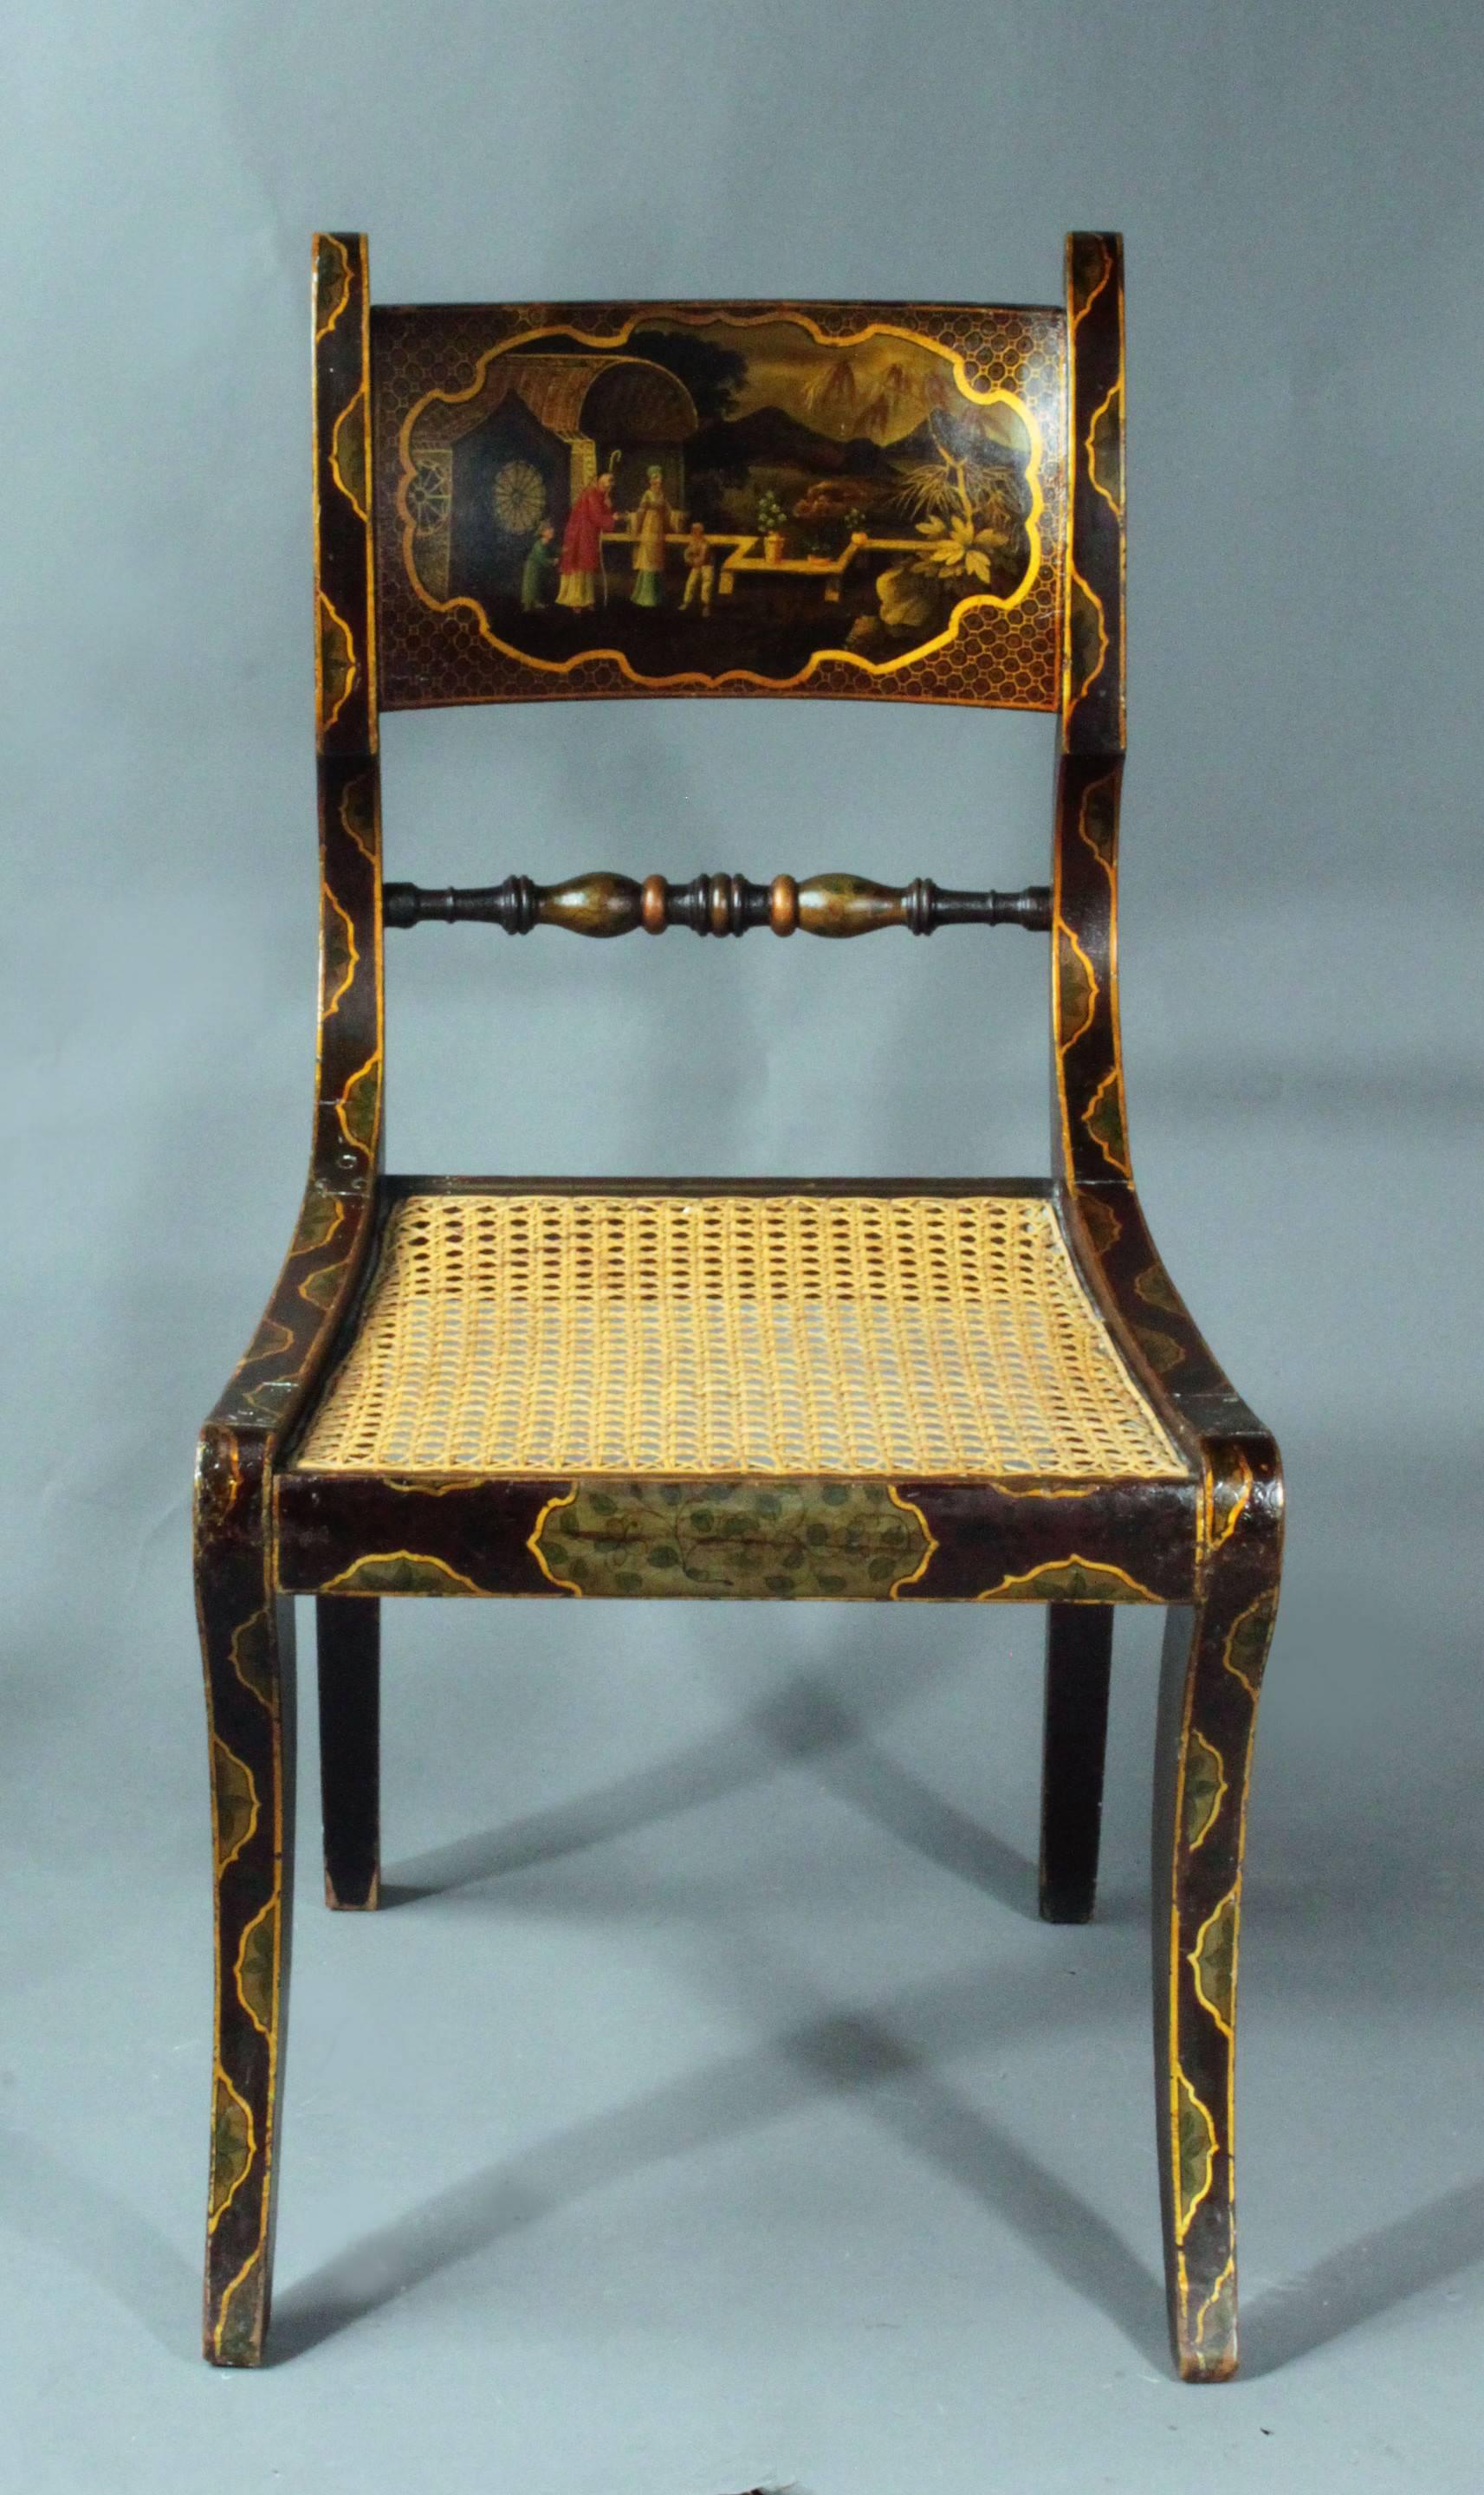 Regency Painted Chair In Good Condition For Sale In Bradford-on-Avon, Wiltshire